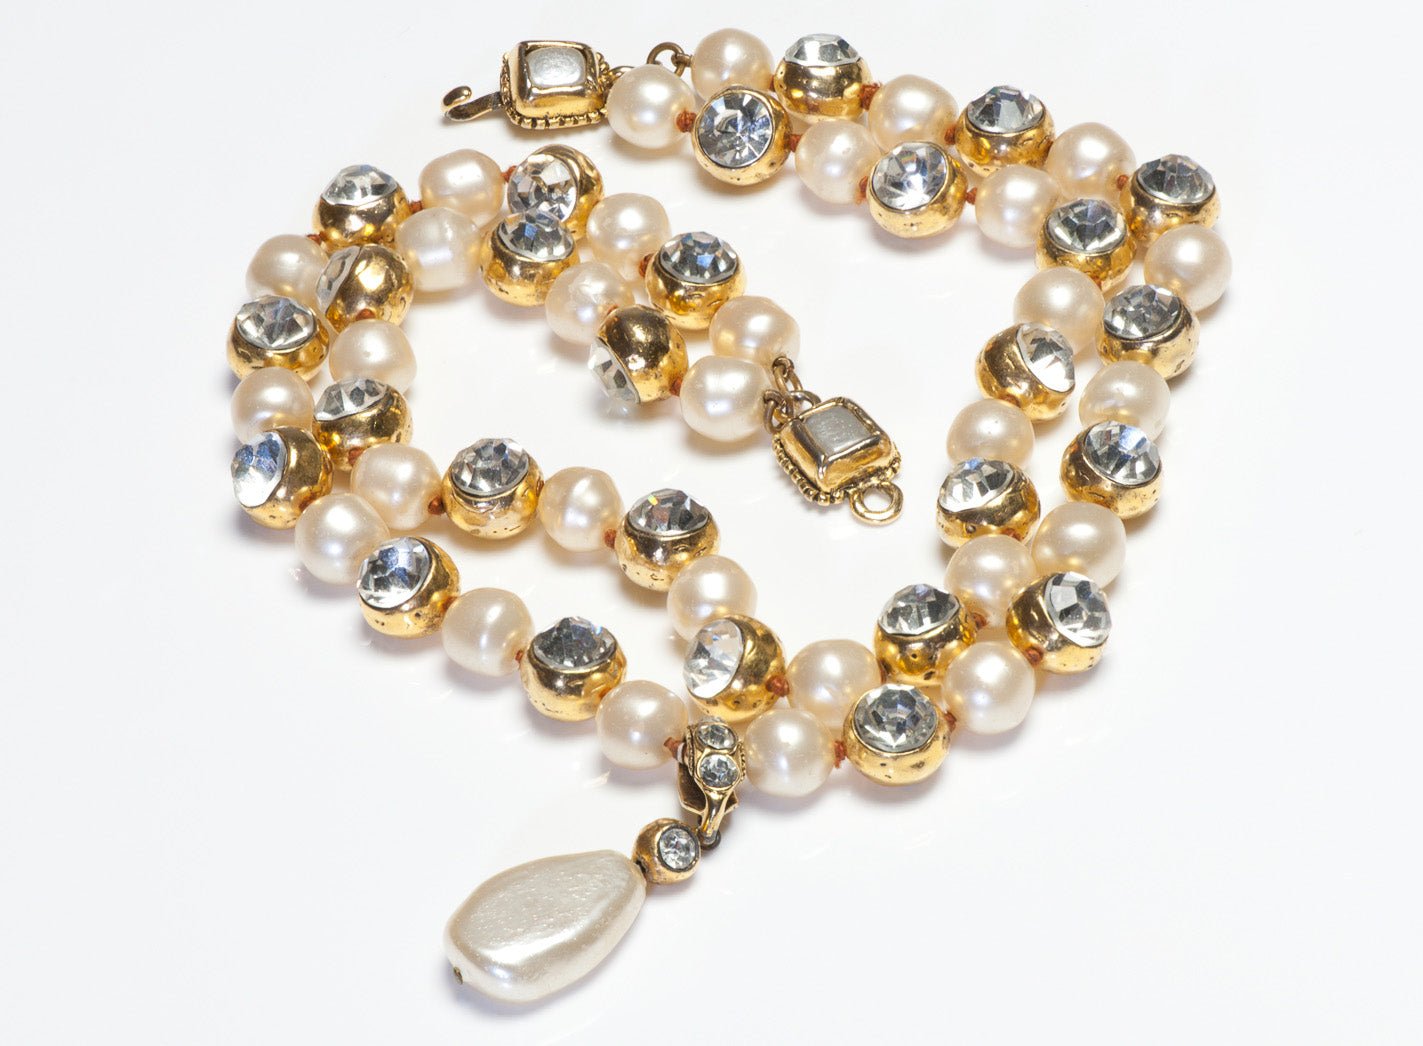 Chanel Paris 1980’s Goossens Hammered Gold Metal Crystal Pearl Beads Necklace